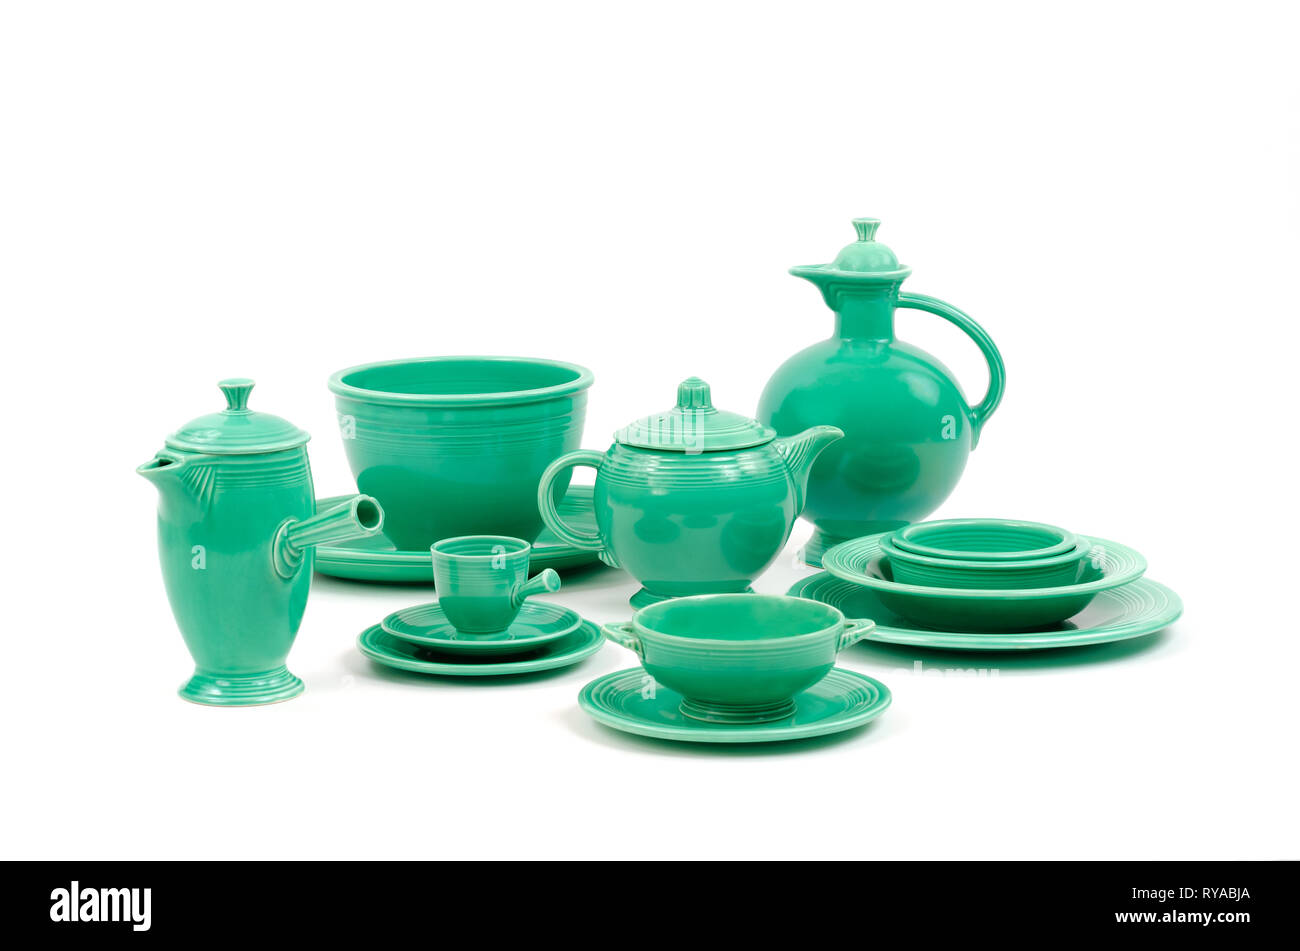 Original Green Glaze Vintage Antique Fiesta Ware Pottery and Tableware. Saucers, Plates, Demitasse Coffee Carafe and Cup, Bowl, Tea pot and Pitcher. Stock Photo